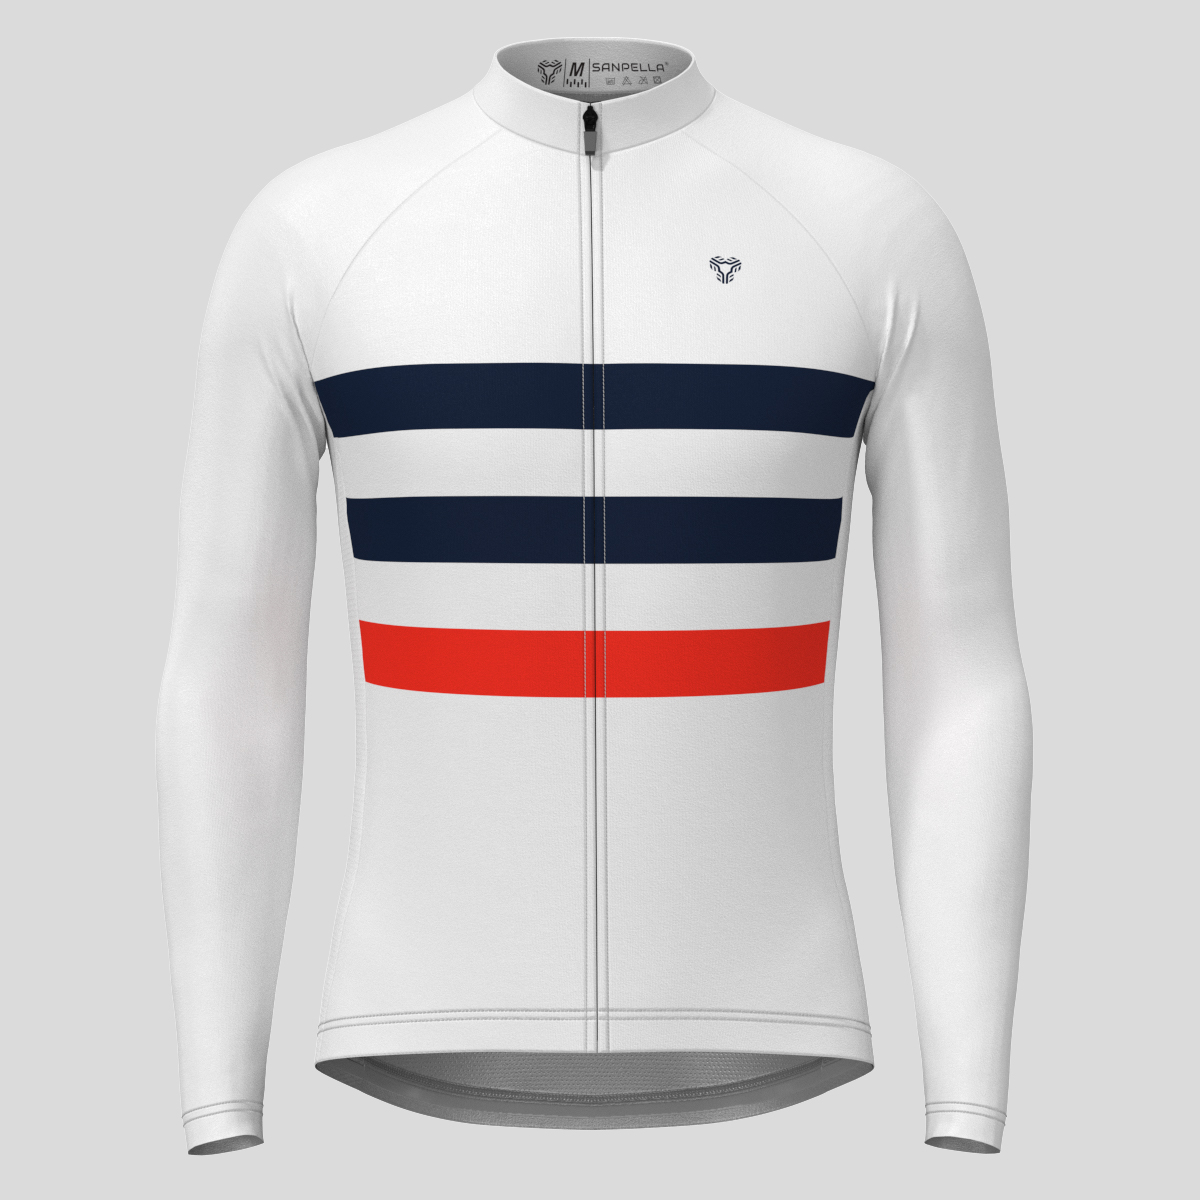 Men's Classic Stripes LS Cycling Jersey - White/Navy/Red